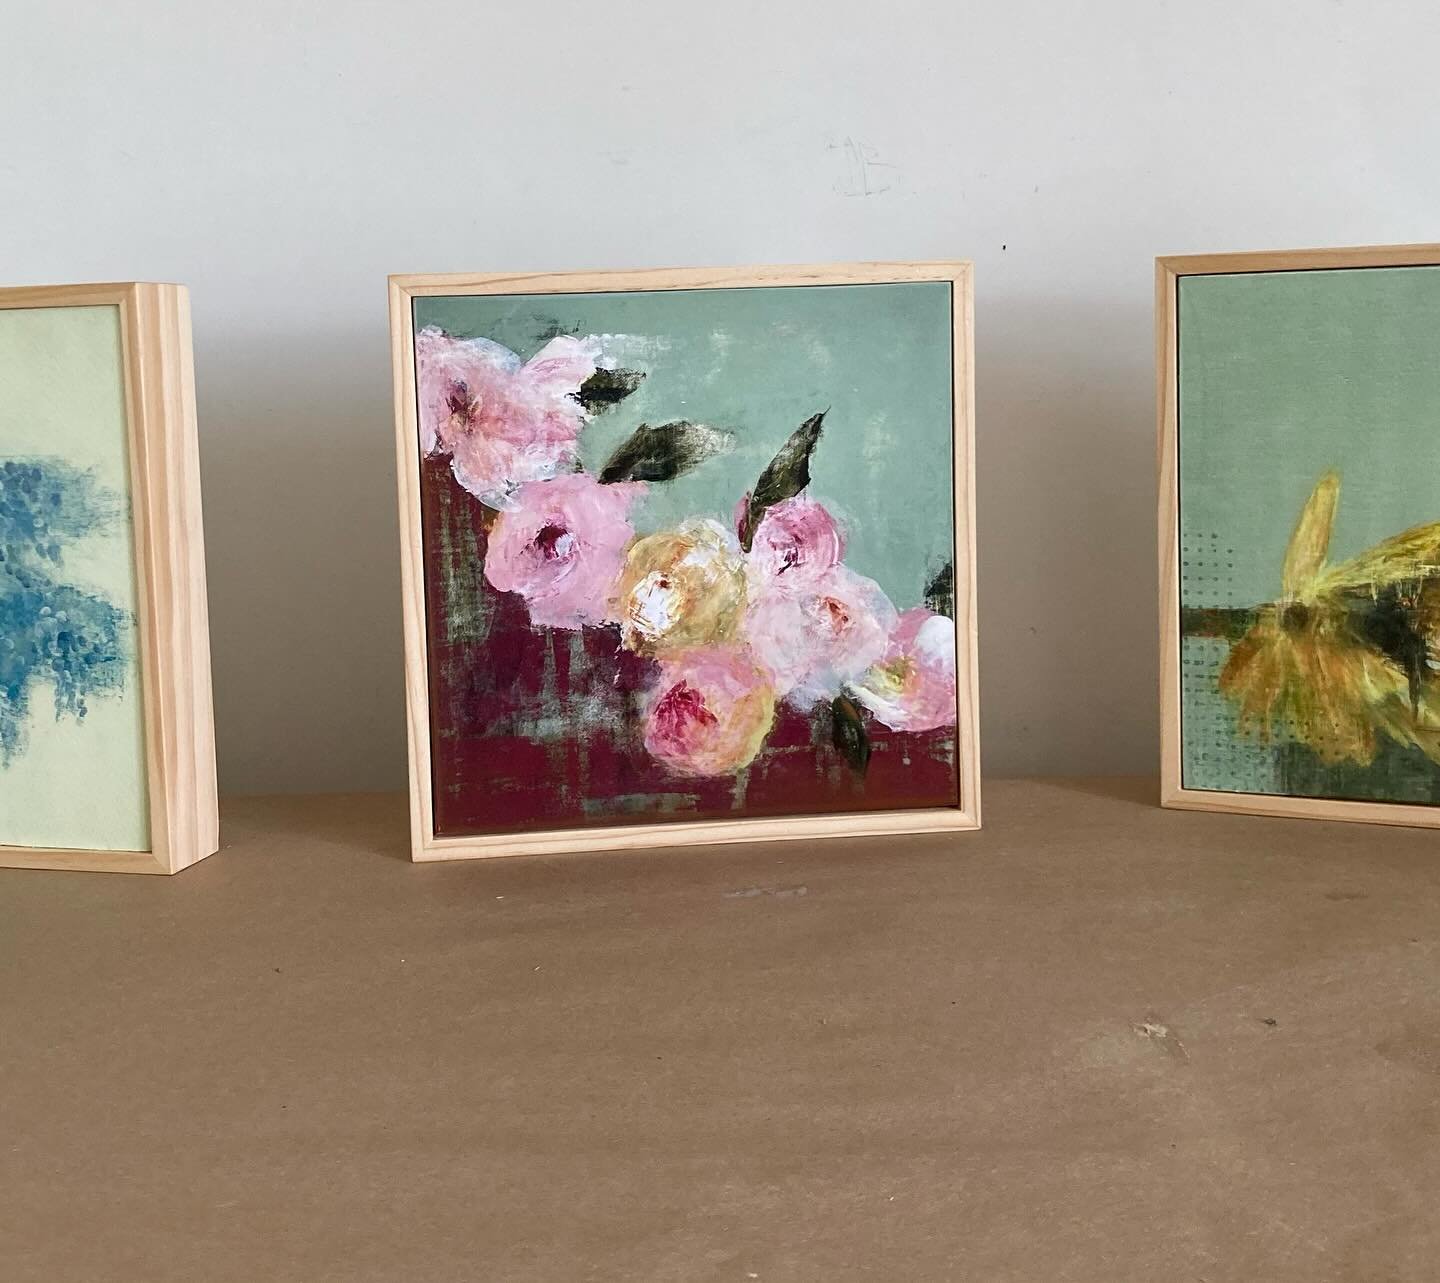 Framing up botanical and barnyard prints along with original paintings for the  East Bay Open Studios both Saturday and Sunday June 1-2 from 11-5.
.
.
.
#eastbayopenstudios #botanicalprintsforsale #newwork #gottohaveart #interiordesign #curator #orig